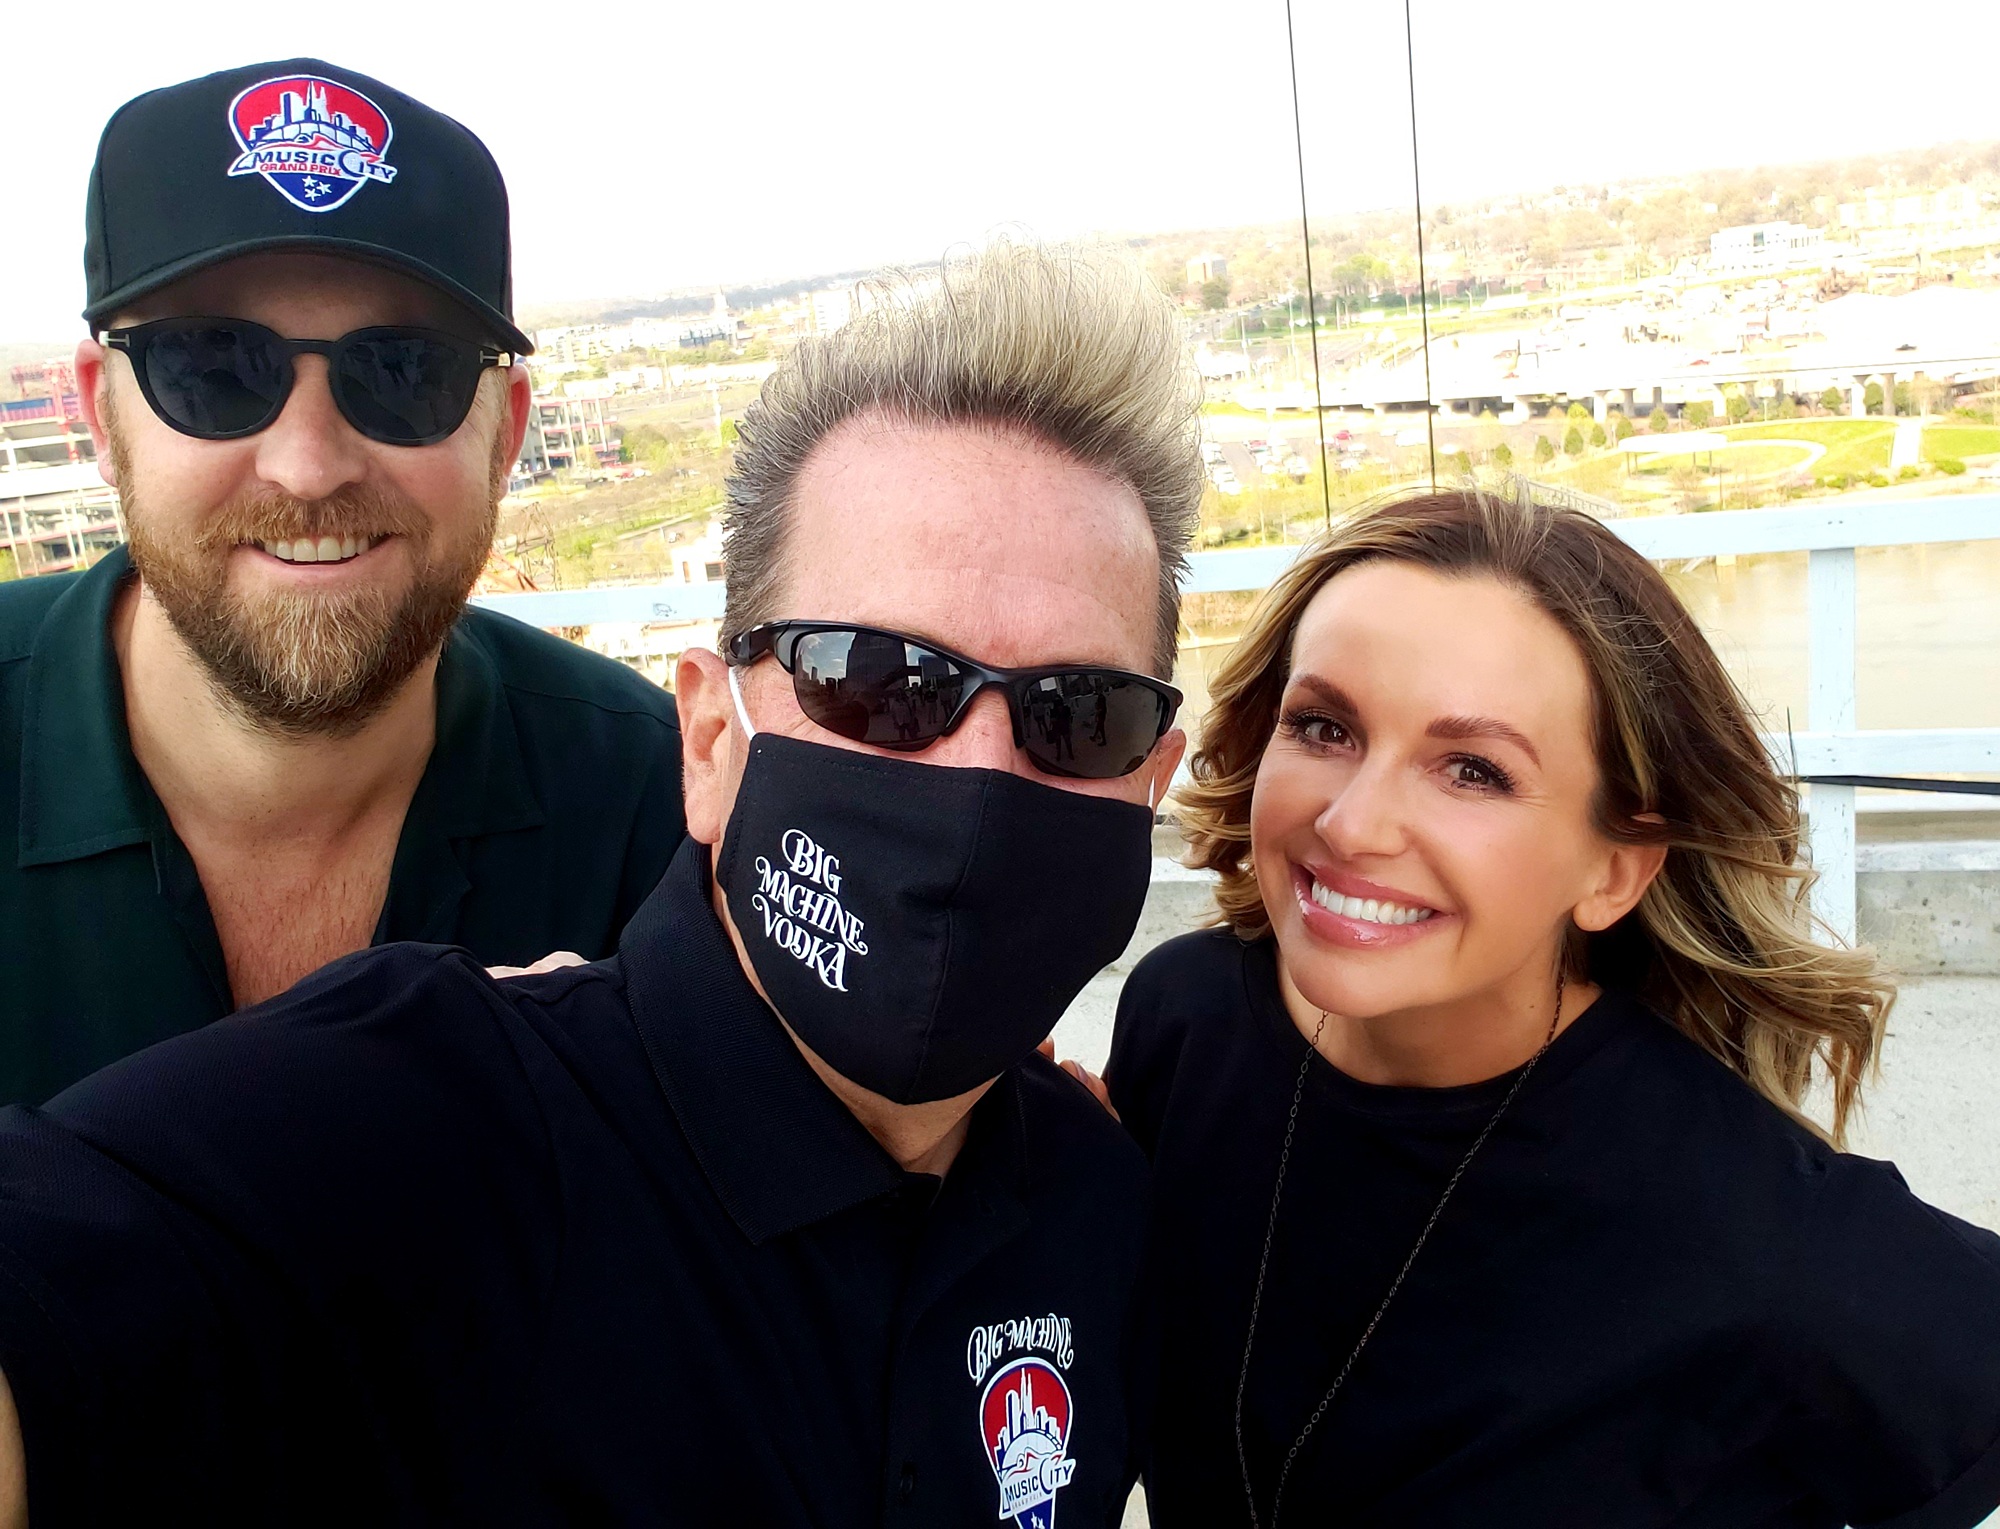 Key Networks, Shawn Parr, Big Machine Label Group, Carly Pearce, Charles Kelley